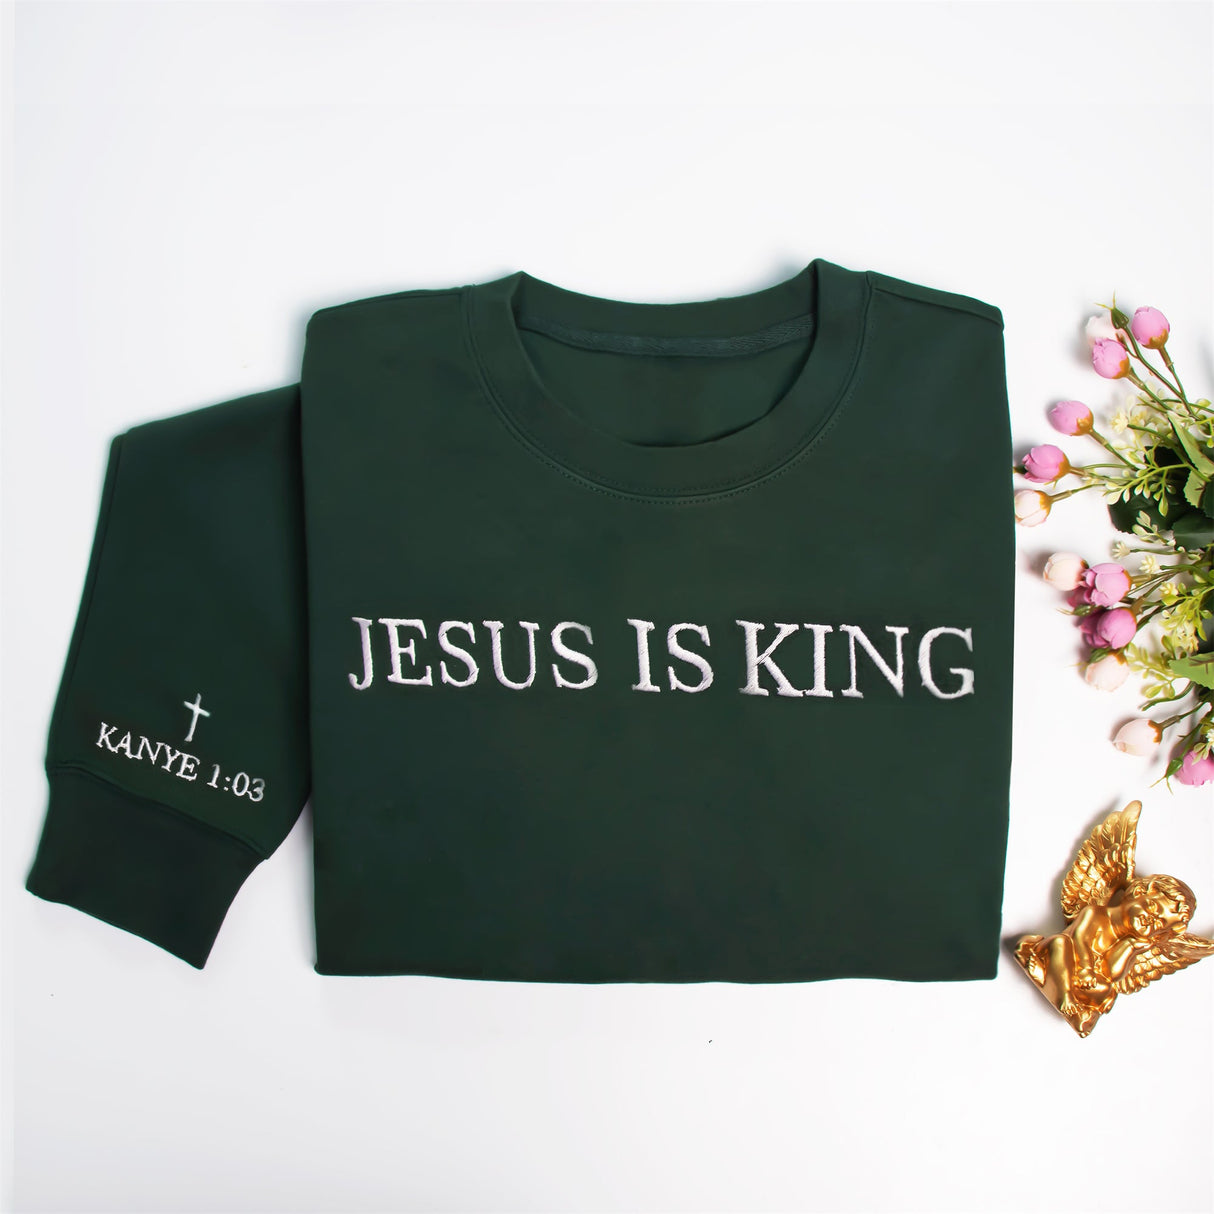 GEX Personalized Embroidered Christian Sweatshirts with GOD IS GOOD - GexWorldwide